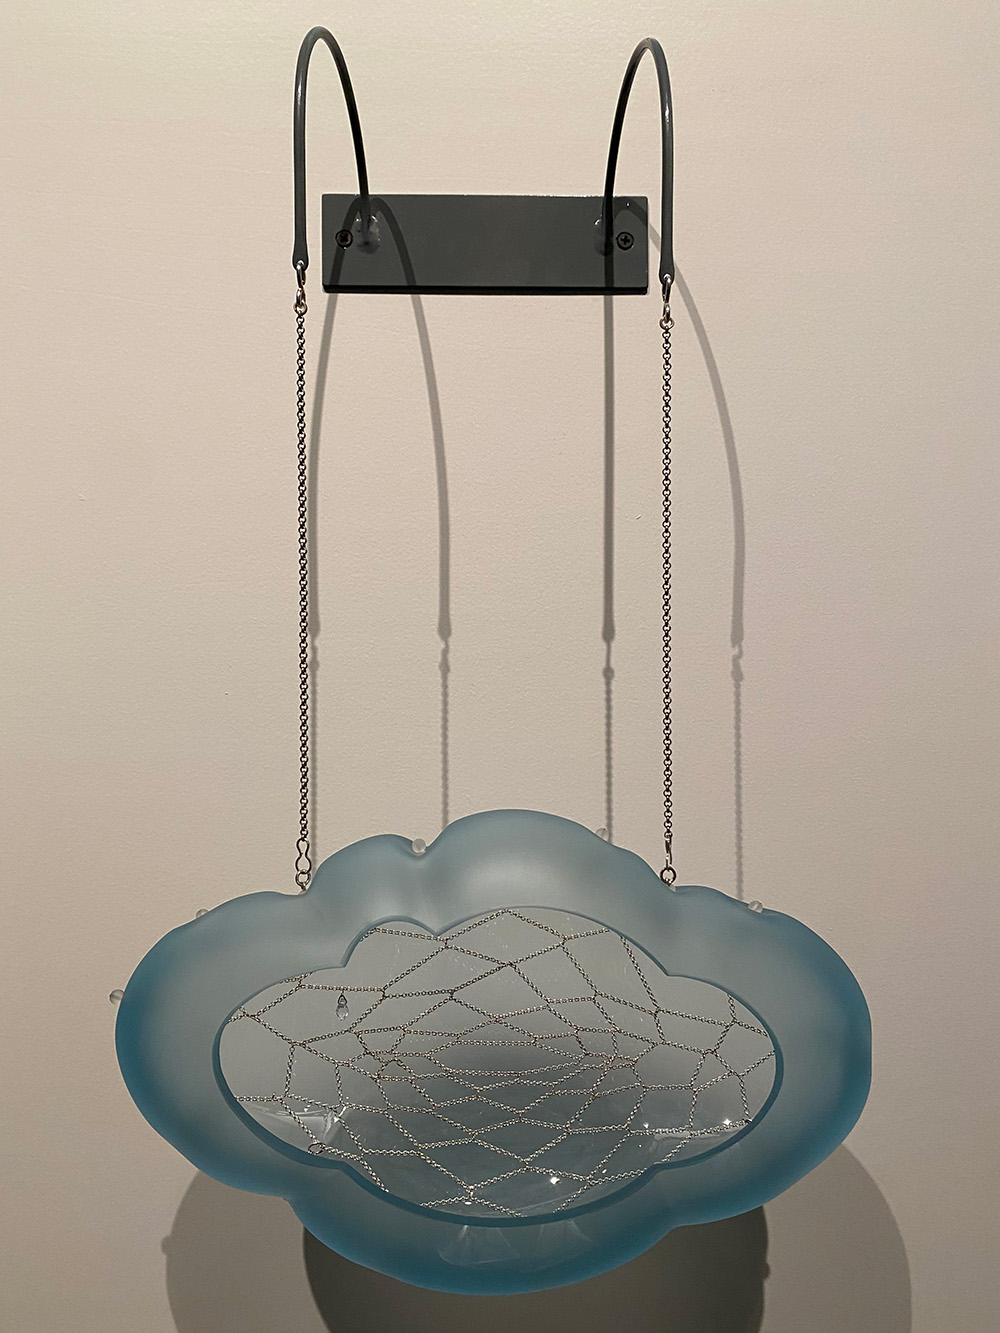 A light blue cloud hangs from the wall on chains